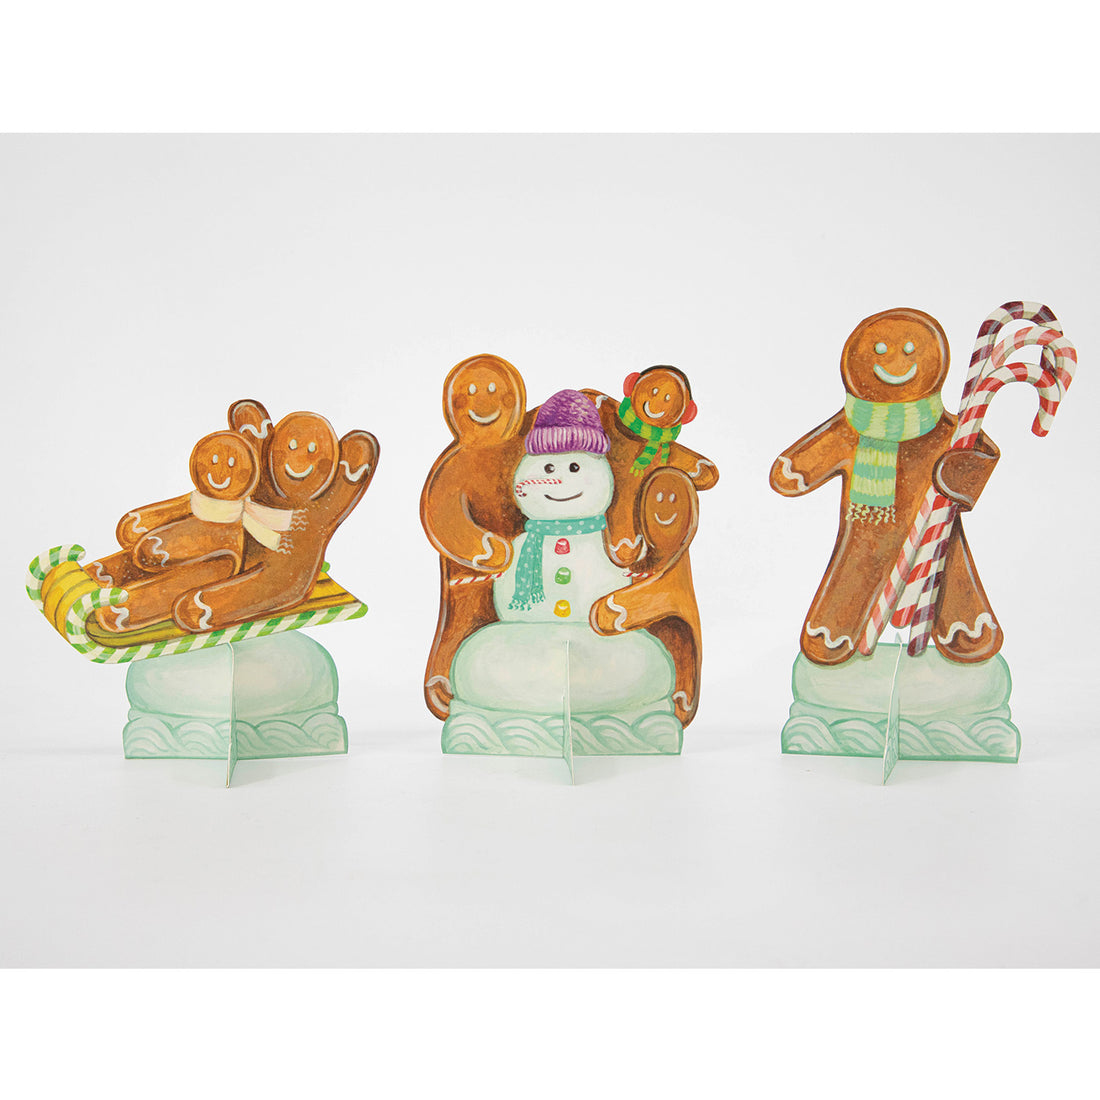 A group of Hester &amp; Cook Gingerbread Table Ornaments centerpiece.